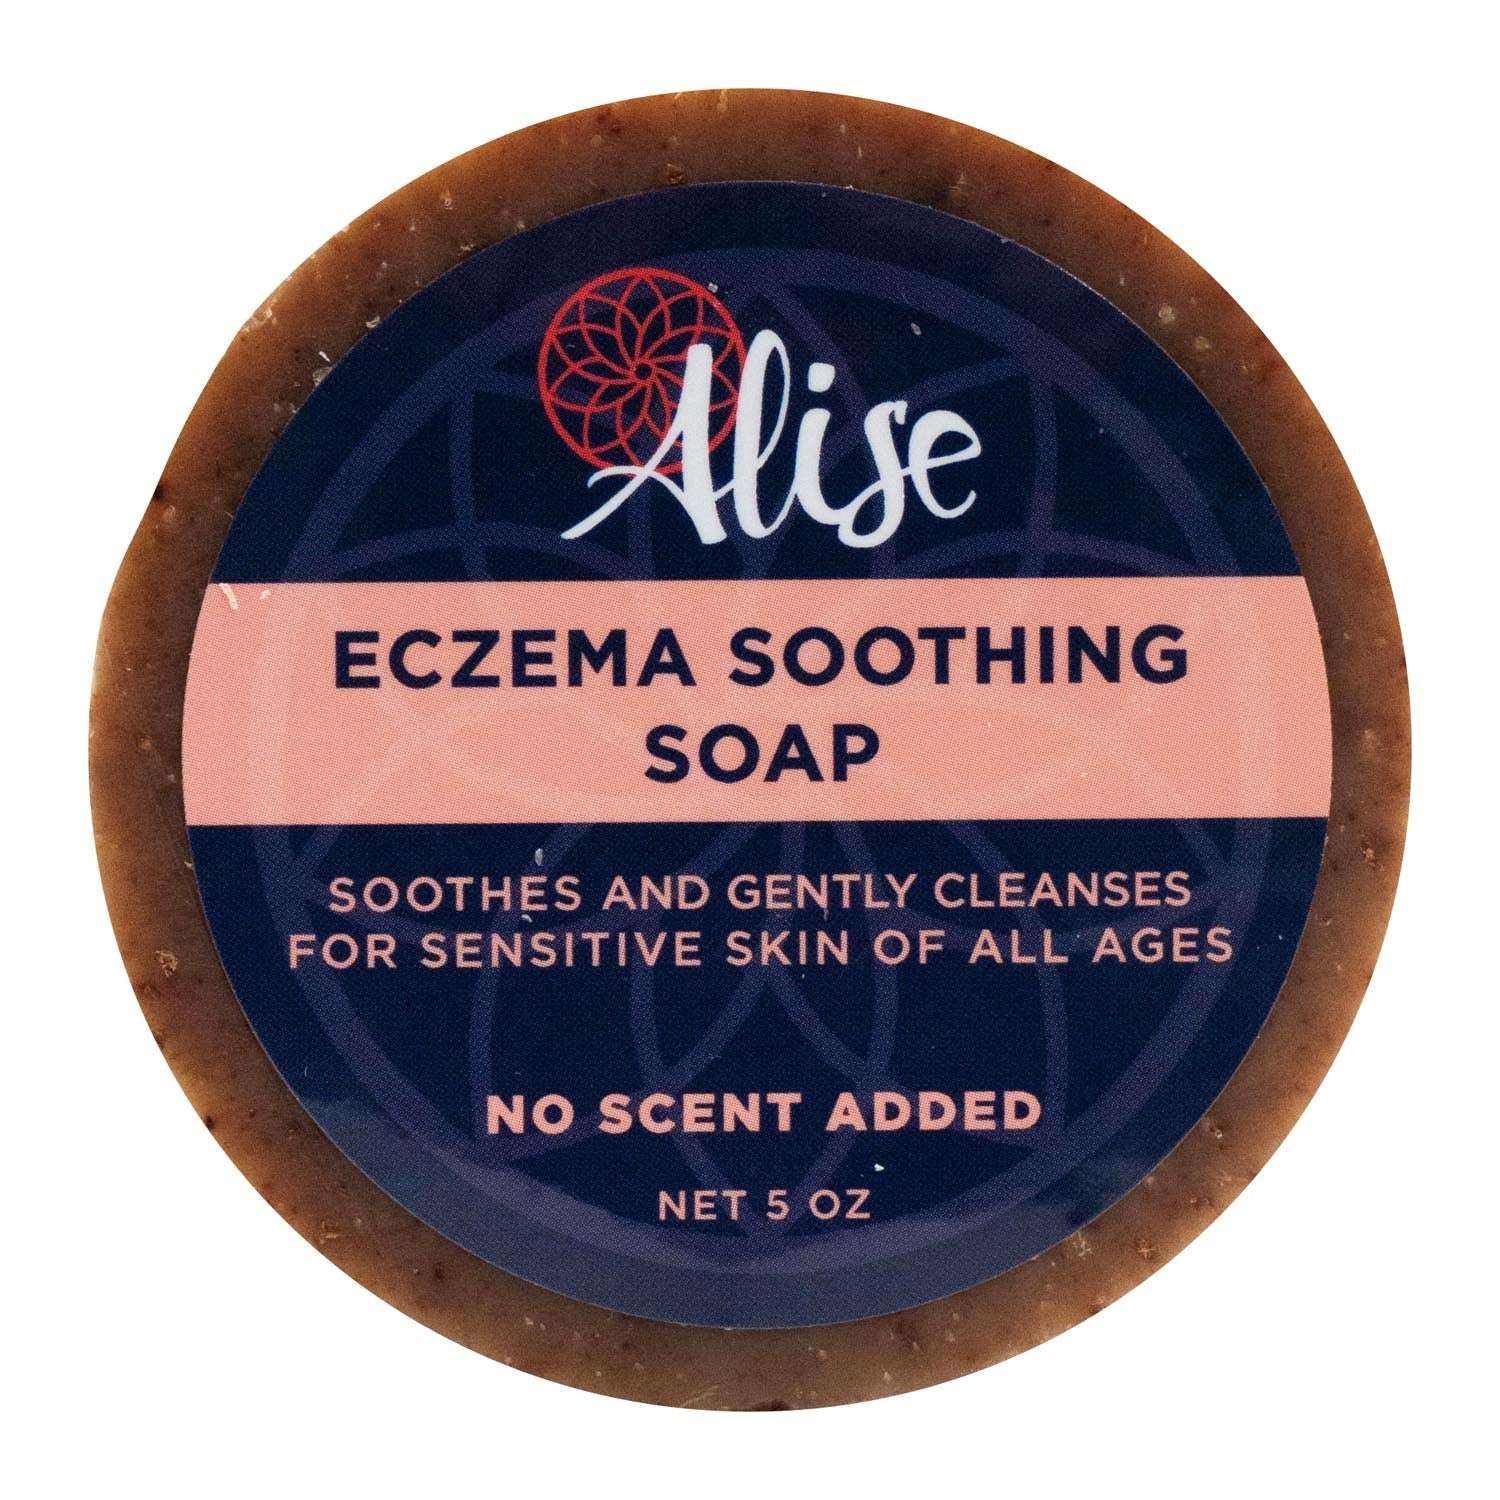 Eczema Soothing Soap 5oz handcrafted by Alise Body Care